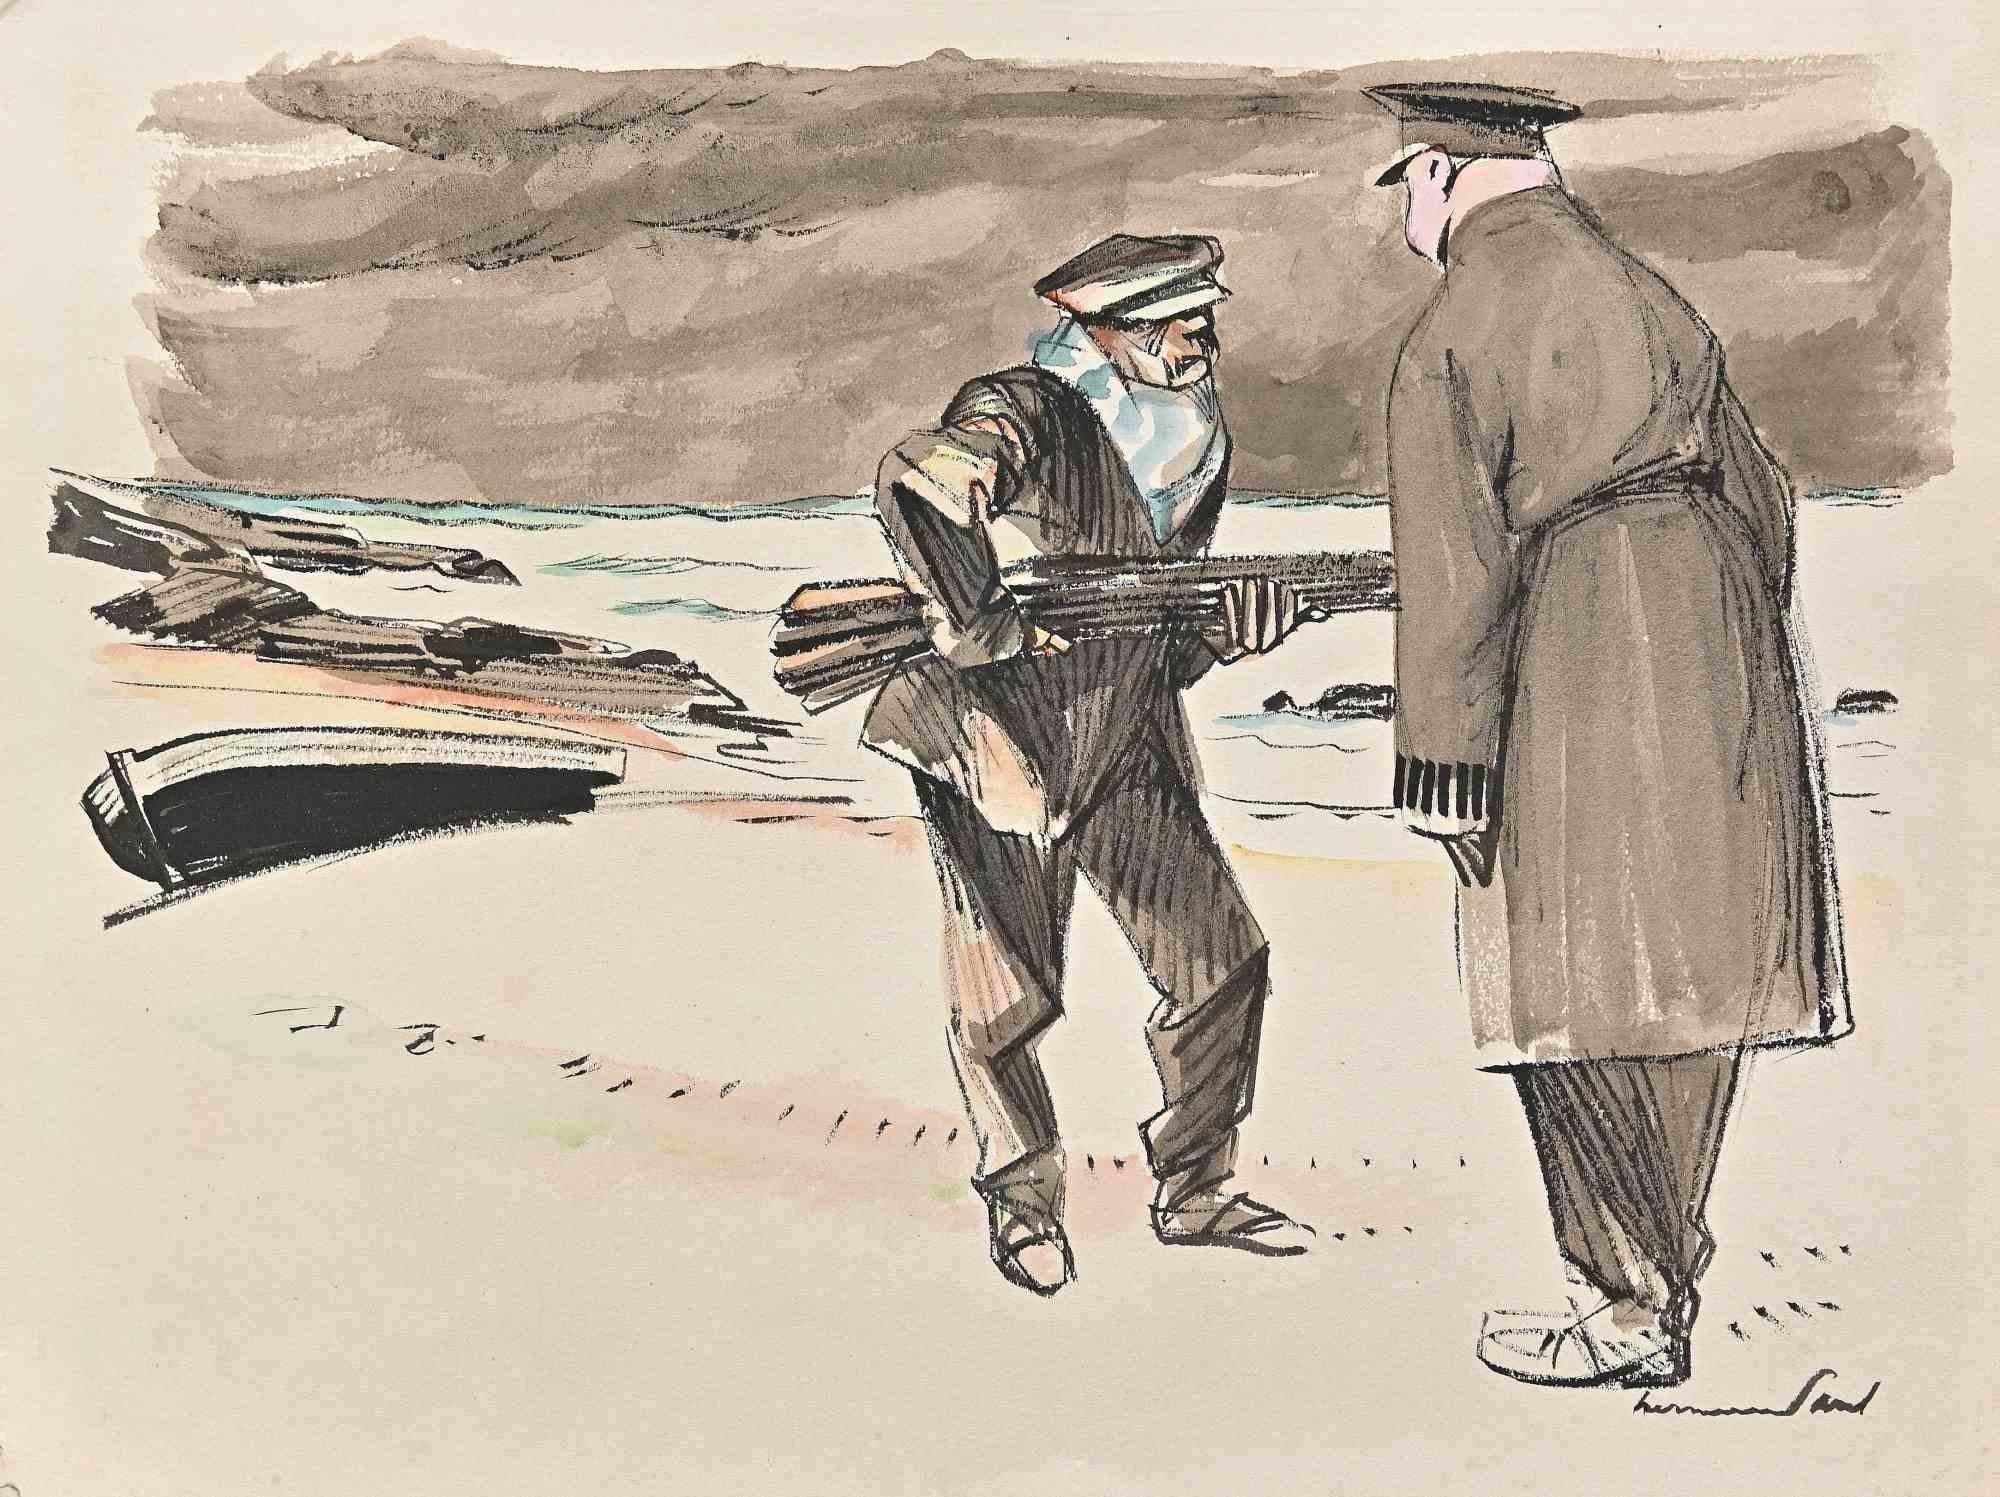 Two Men is a Watercolour Drawing realized by Hermann Paul. 

Hand signed on the lower right corner.

Good condition.

René Georges Hermann-Paul (27 December 1864 – 23 June 1940) was a French artist. He was born in Paris and died in